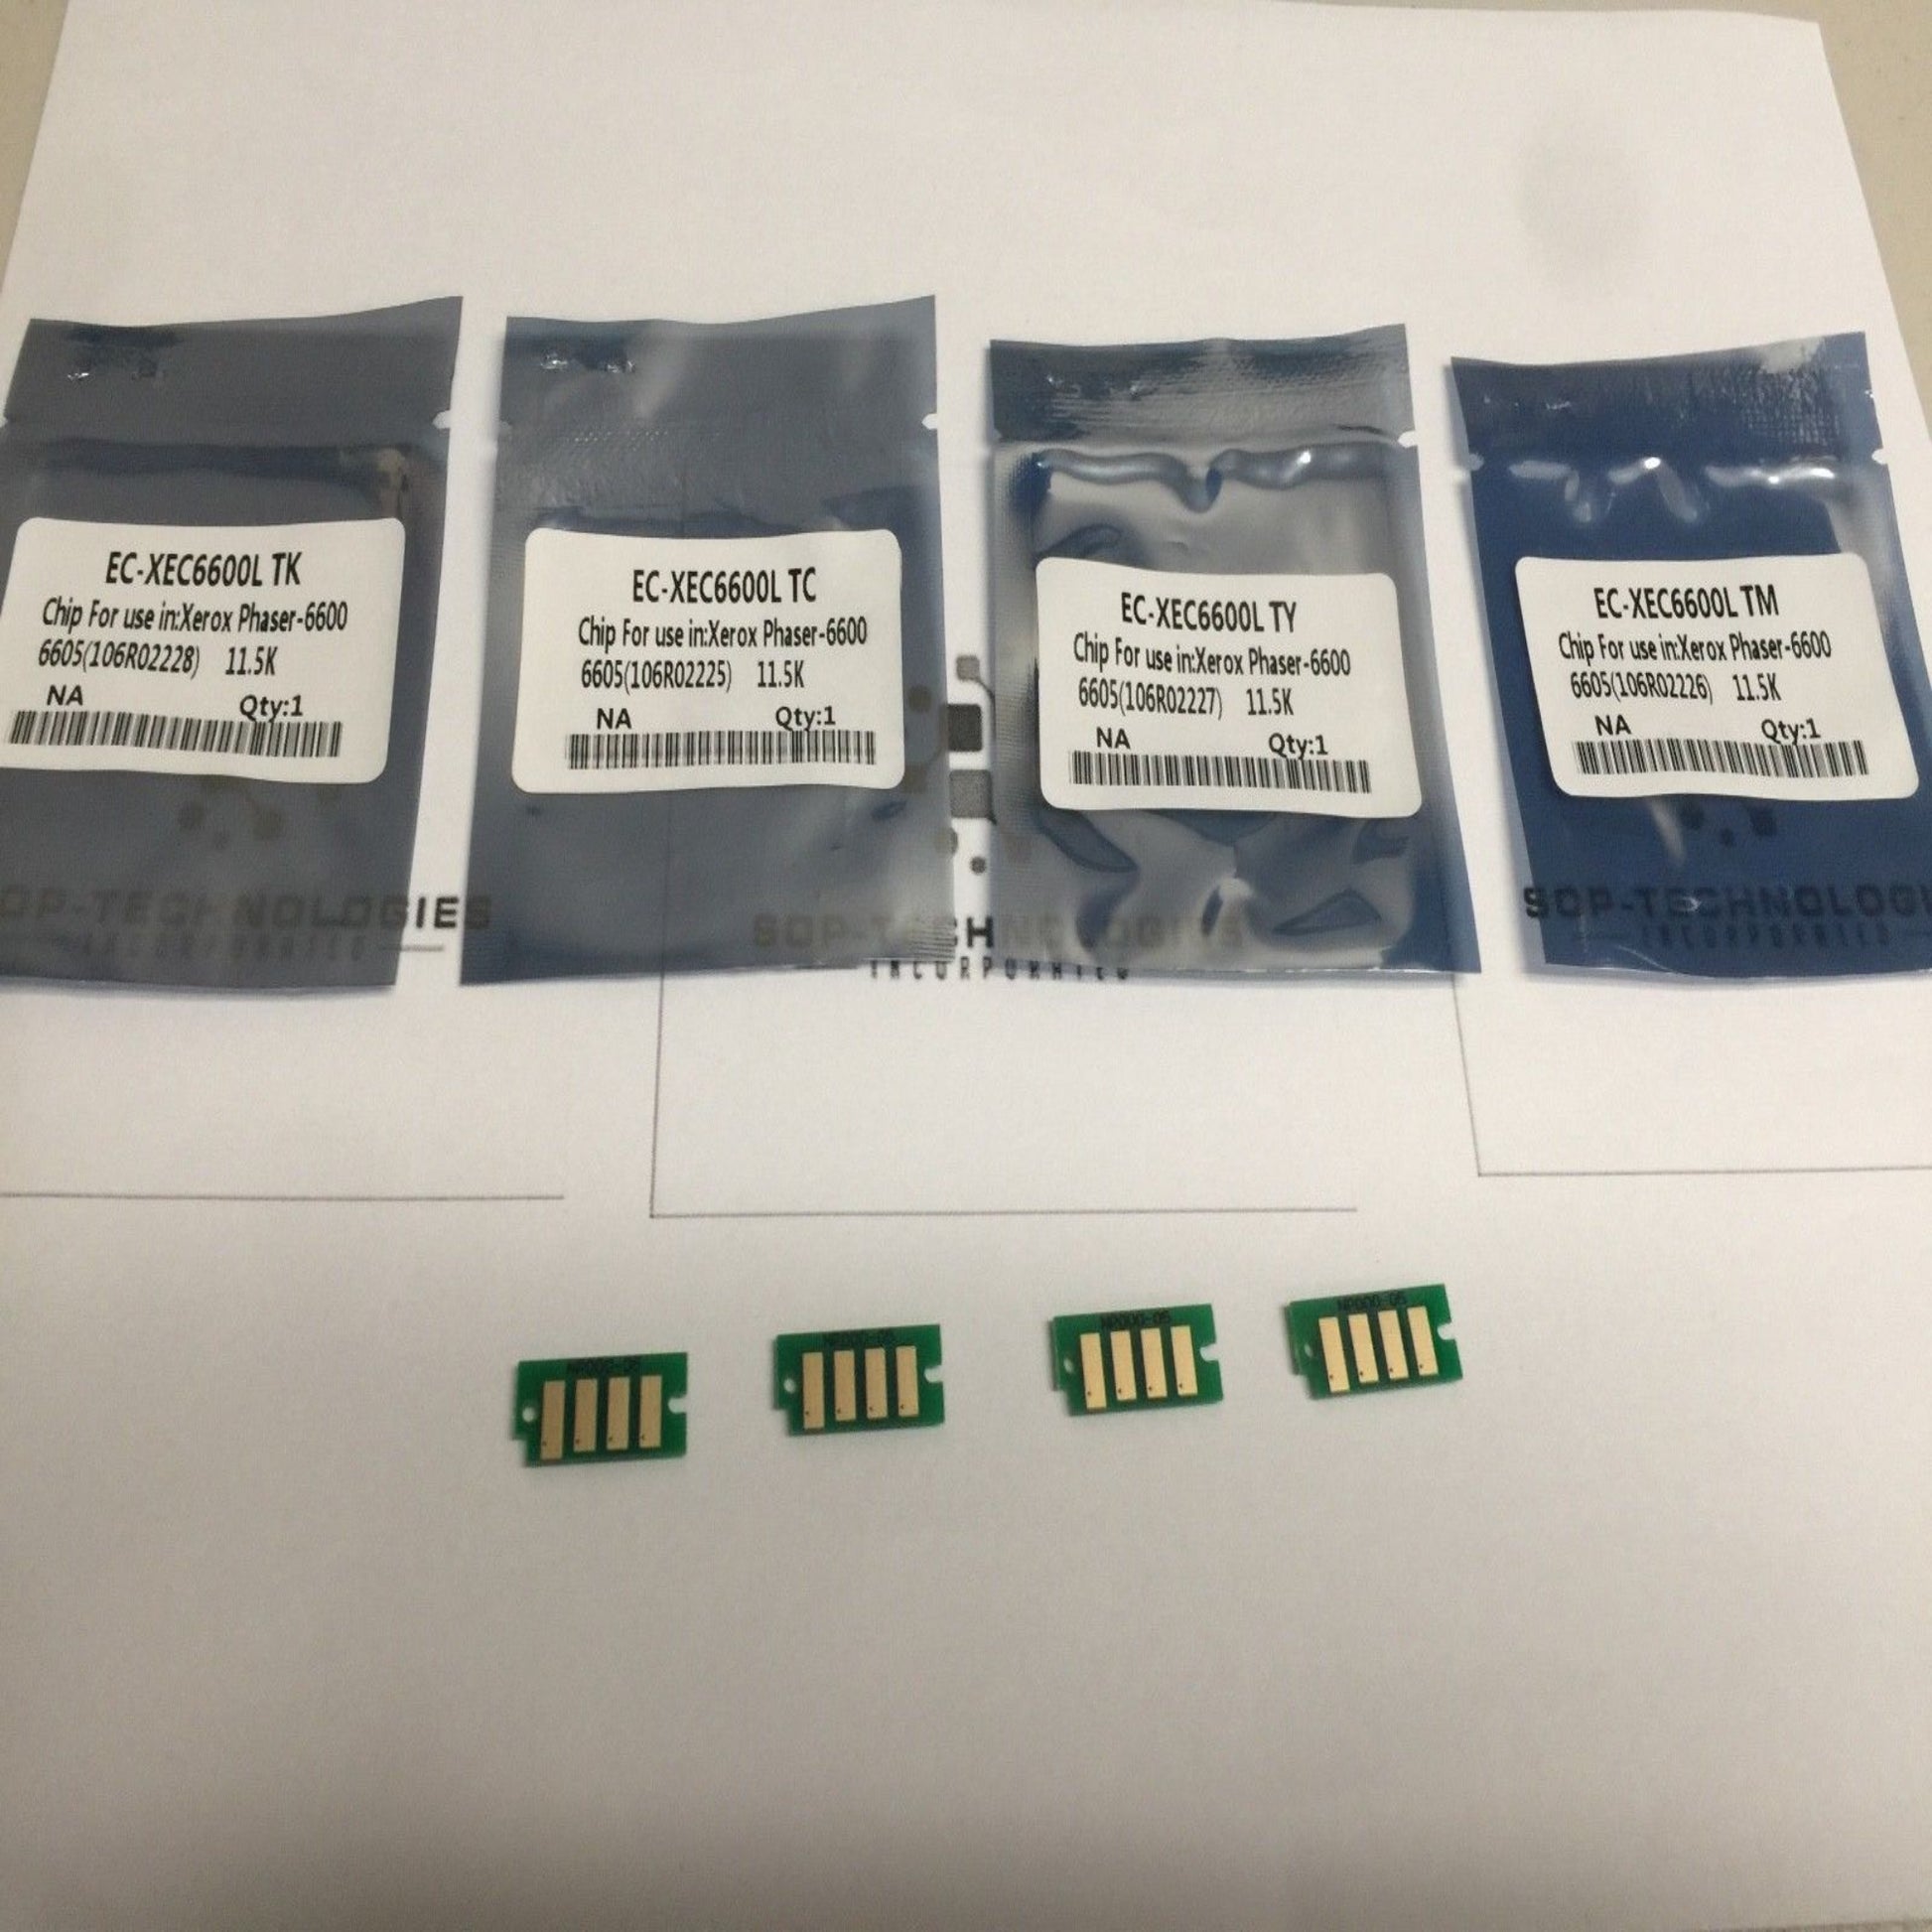 4 Toner Chips for Xerox Phaser 6600 WorkCentre 6605 106R02225 -106R02228 High Yield - SOP-TECHNOLOGIES, INC.